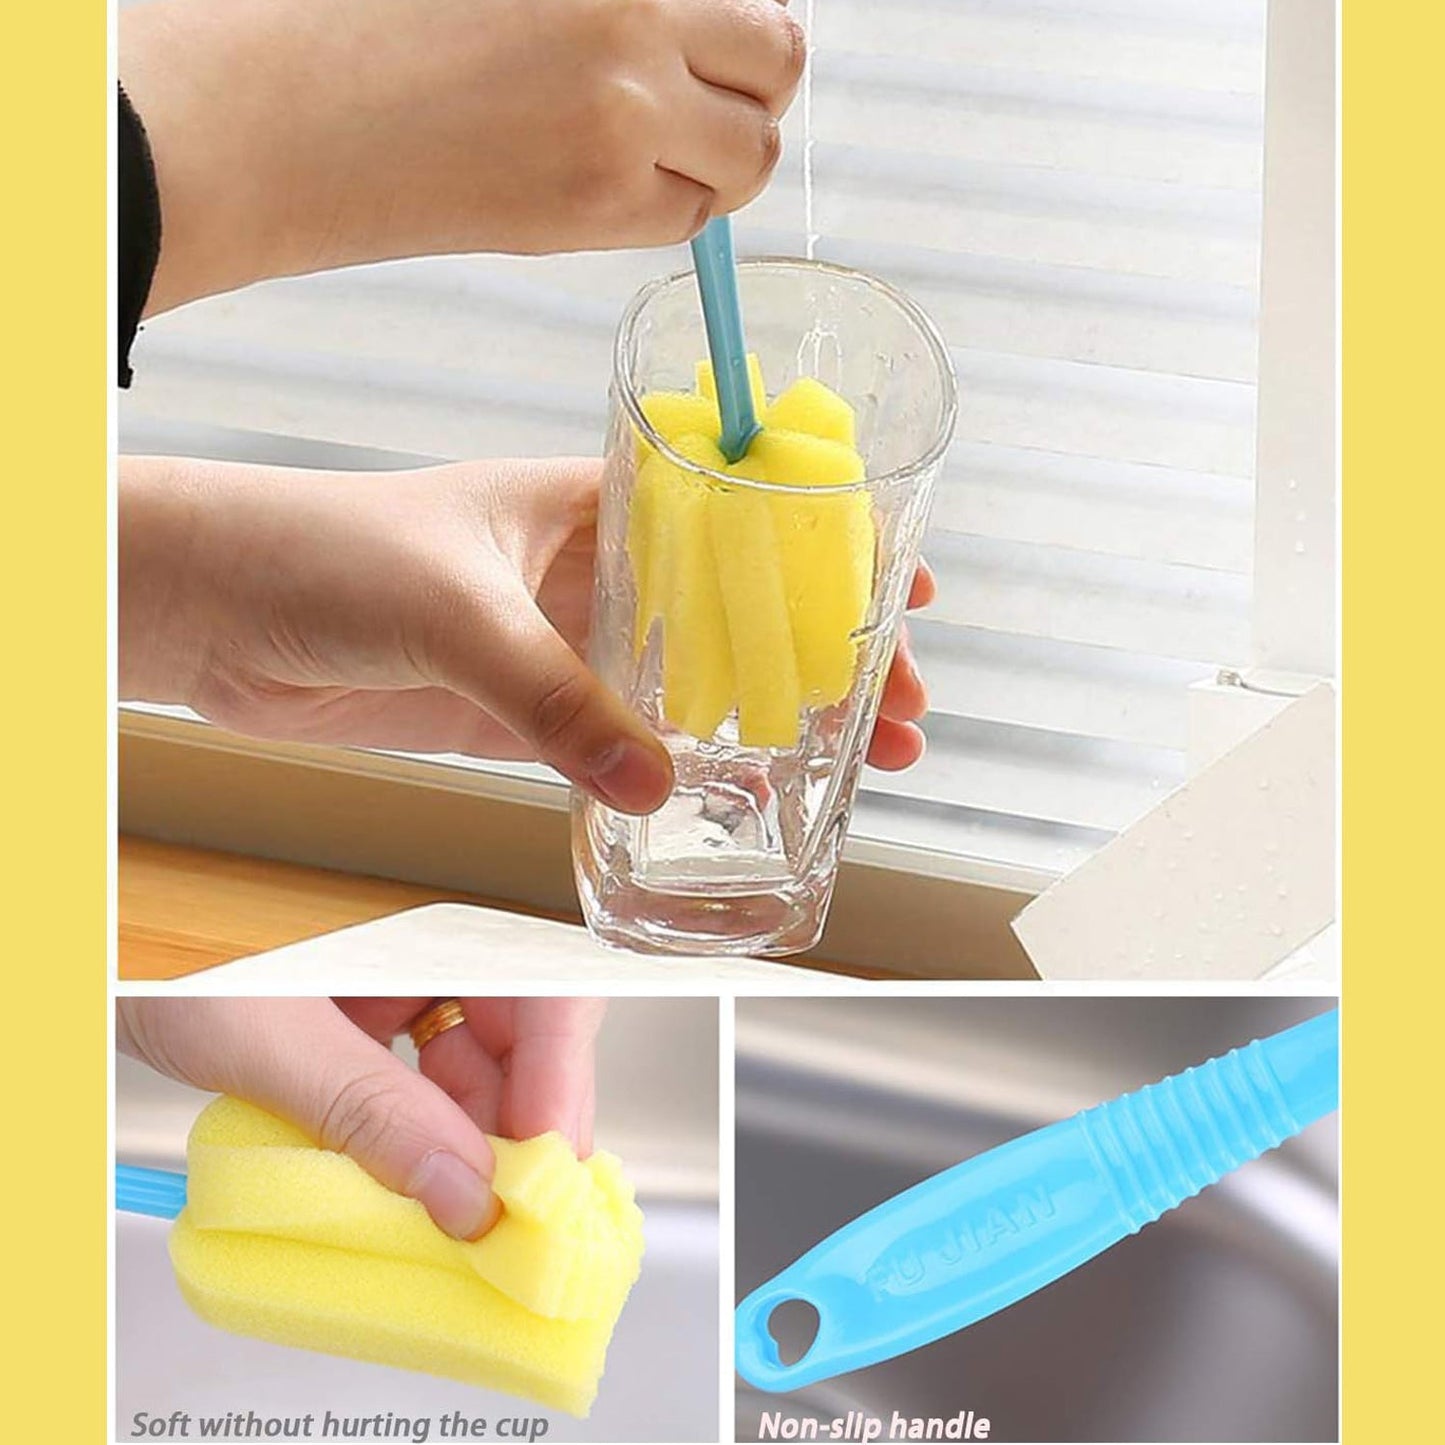 Sponge Cup Washing Brush For Washing Cup Milk Bottle Cleaning Sponge Head, Household Kitchen Cleaning Tool 20Cm